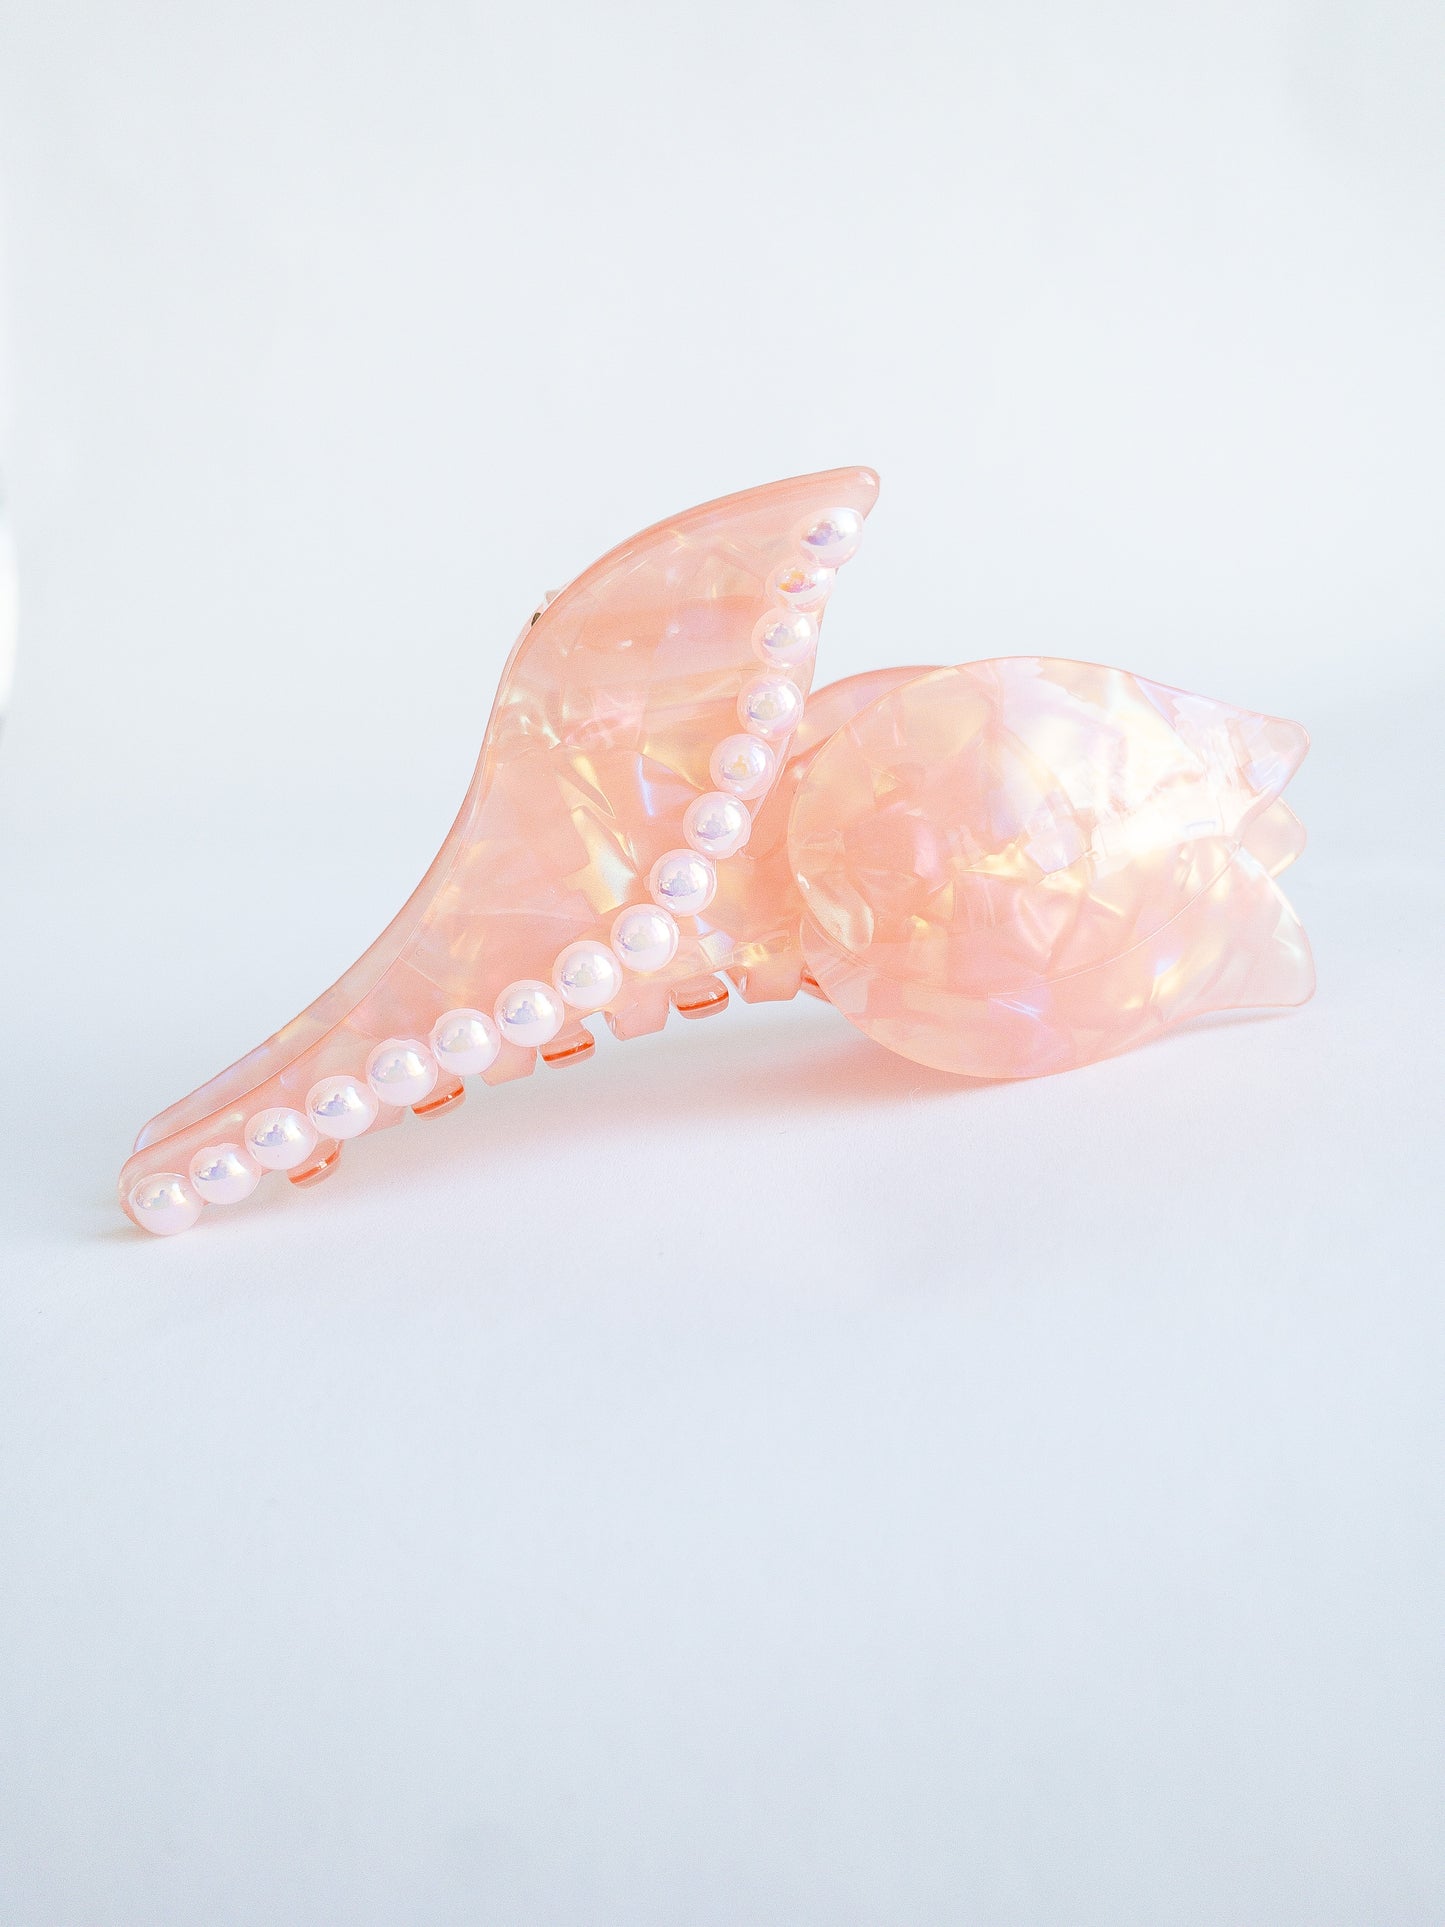 A stunning pearly tulip does exist. This claw is pearlescent all the way around, detailed with small pearls in a curvy beautiful tulip shape.